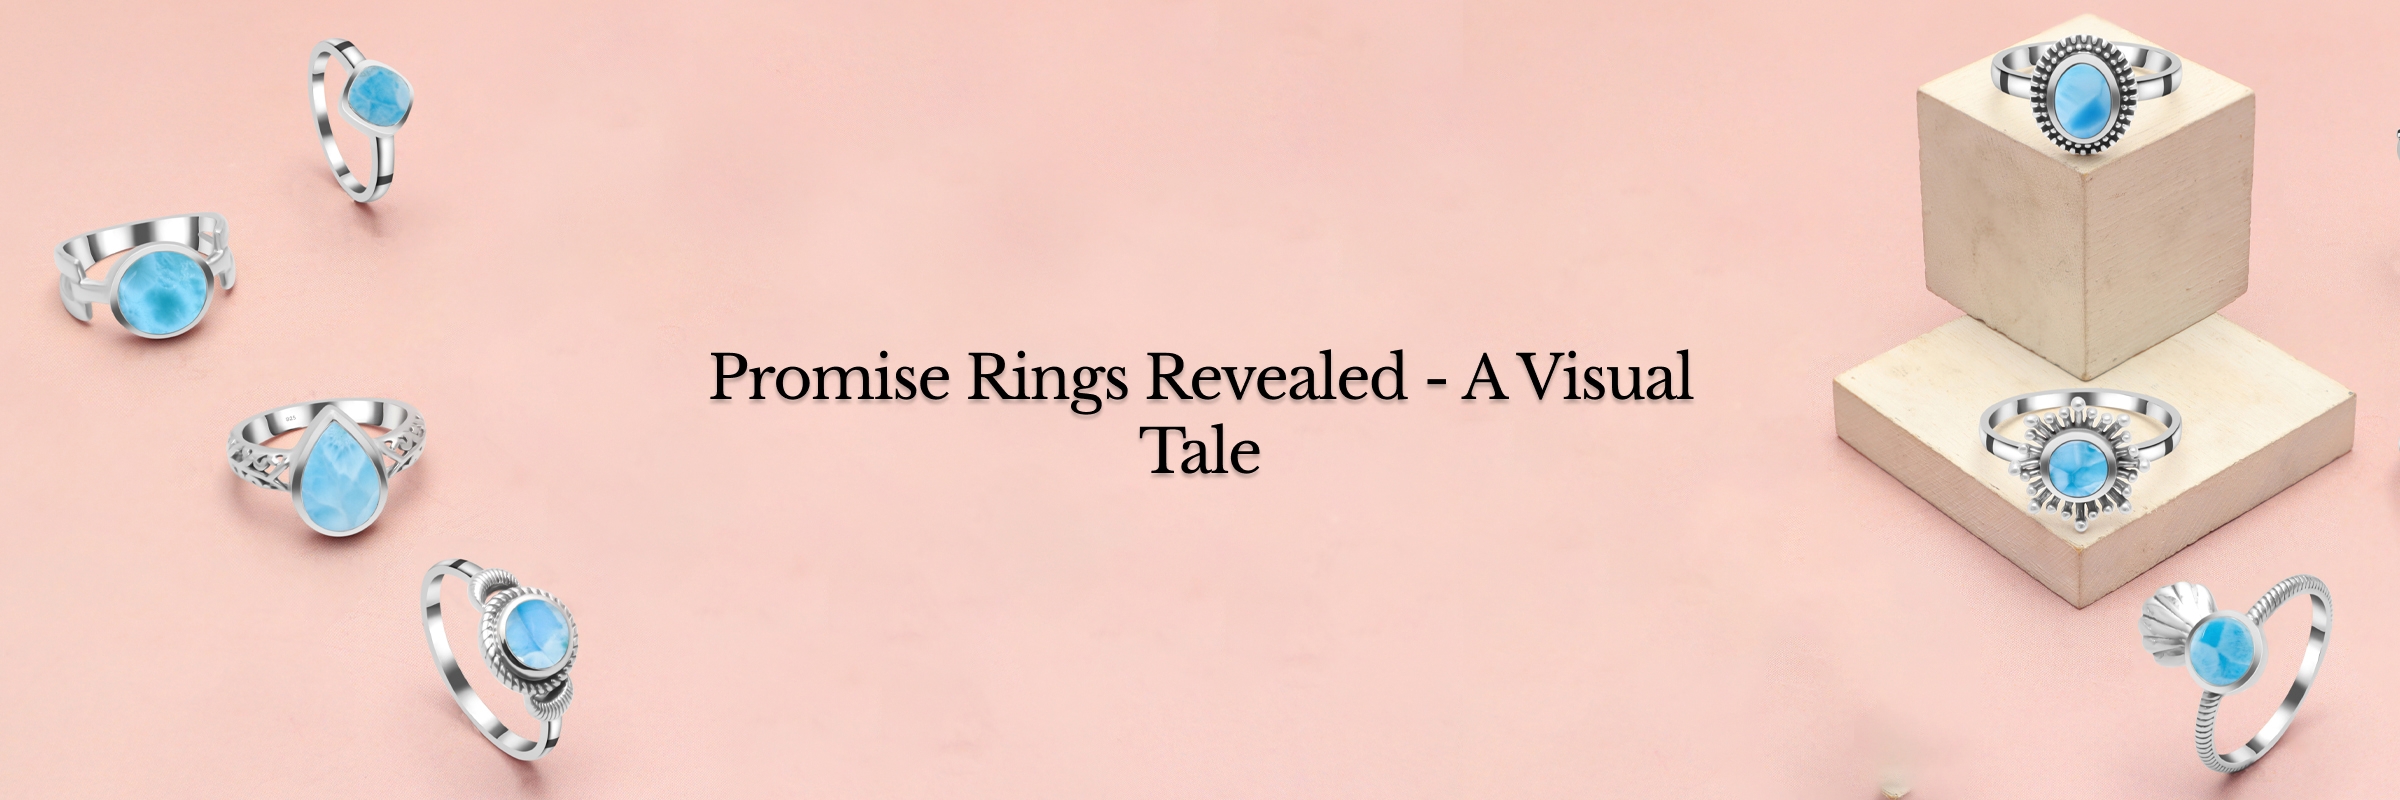 What Does a Promise Ring Look Like?